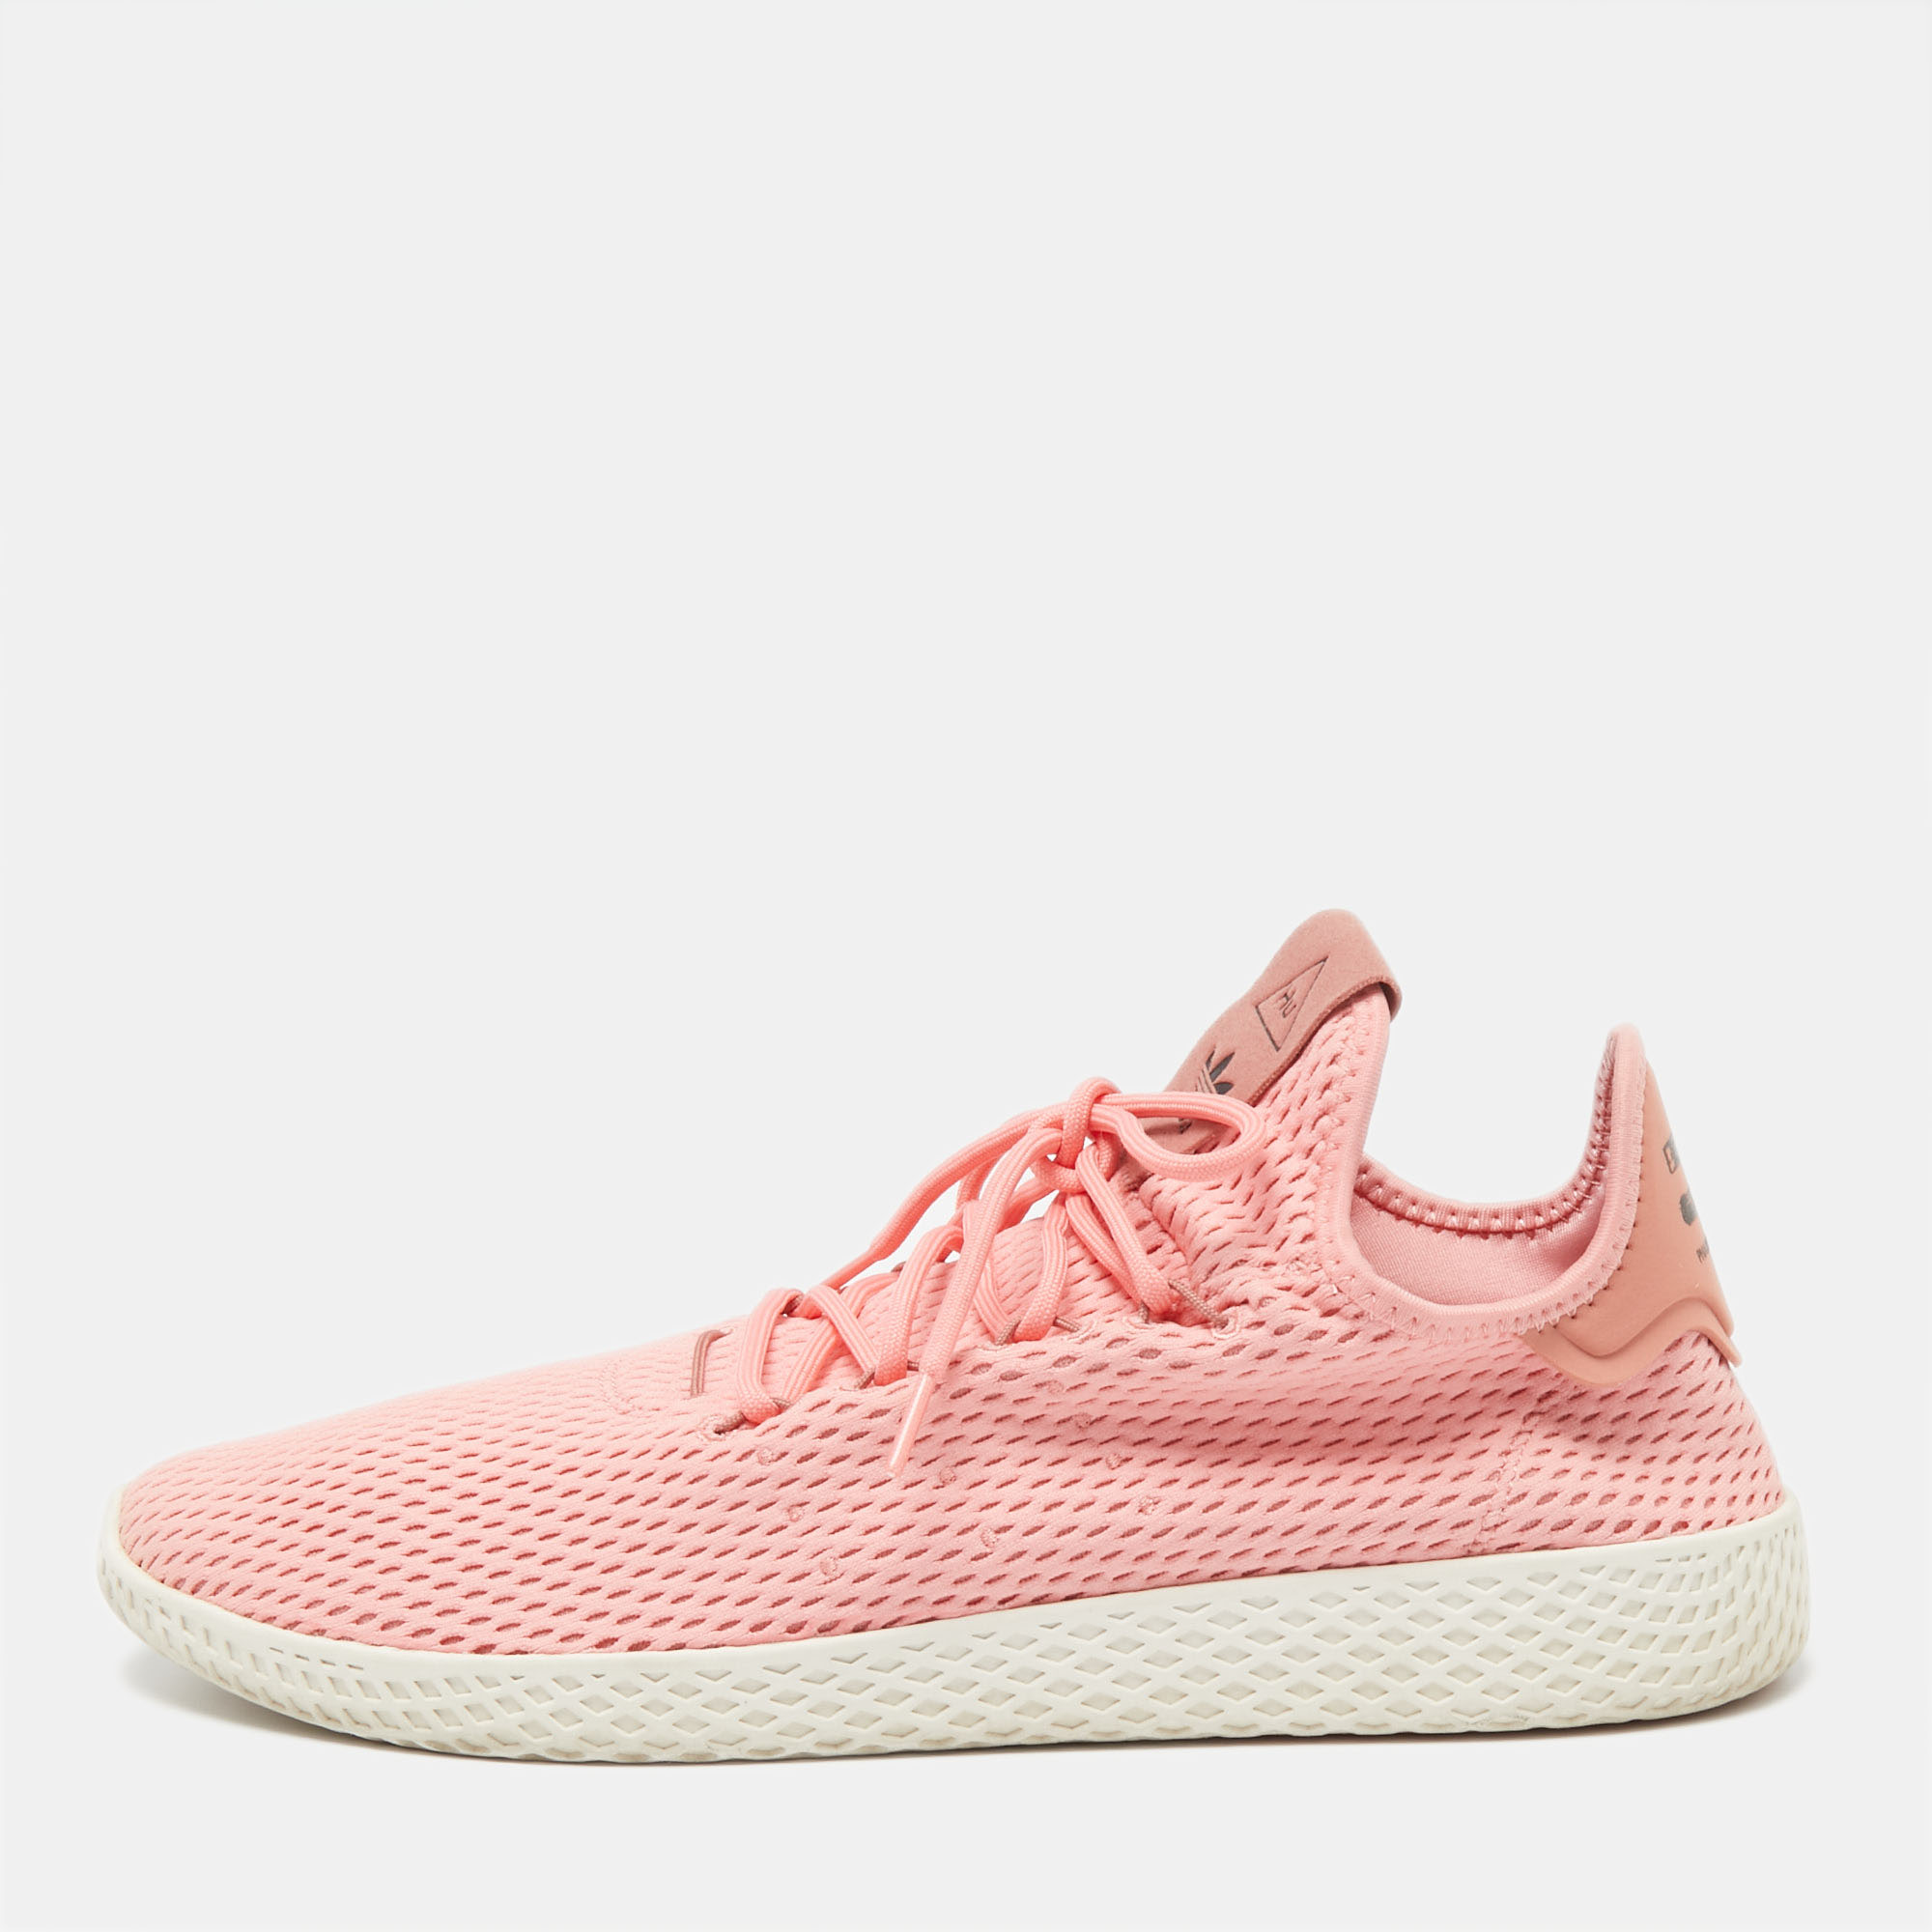 

adidas x Pharell Williams Rose Pink Fabric Tennis Sneakers Size